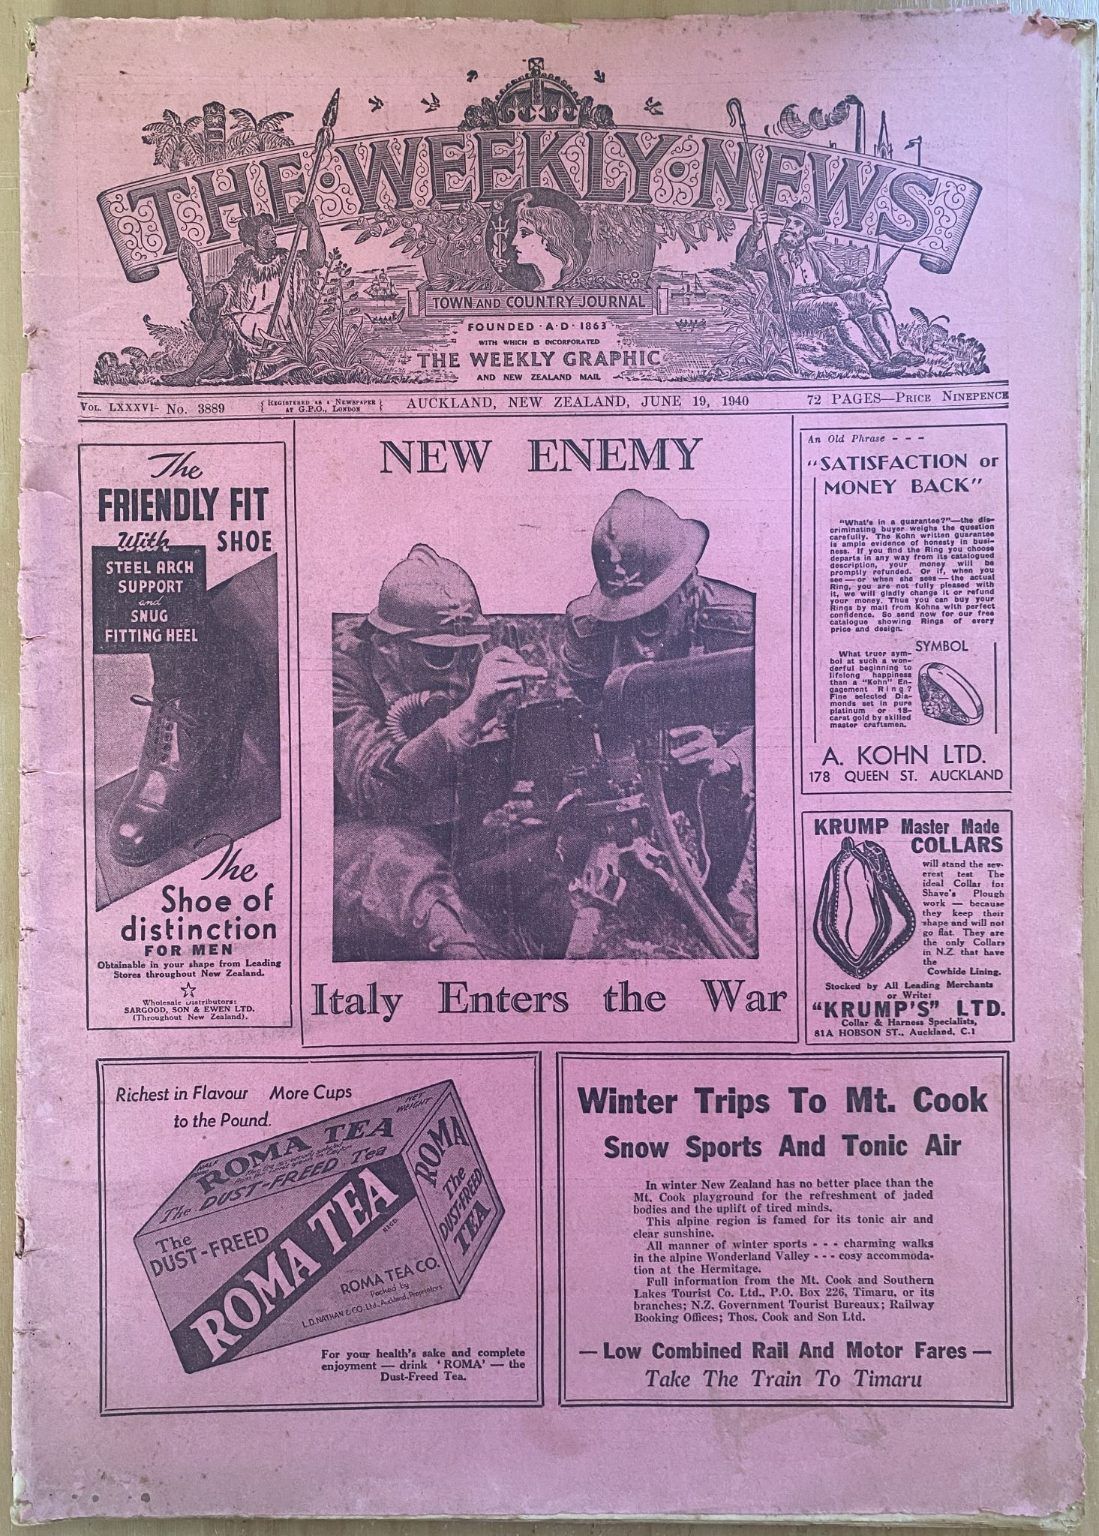 OLD NEWSPAPER: The Weekly News - No. 3889, 19 June 1940